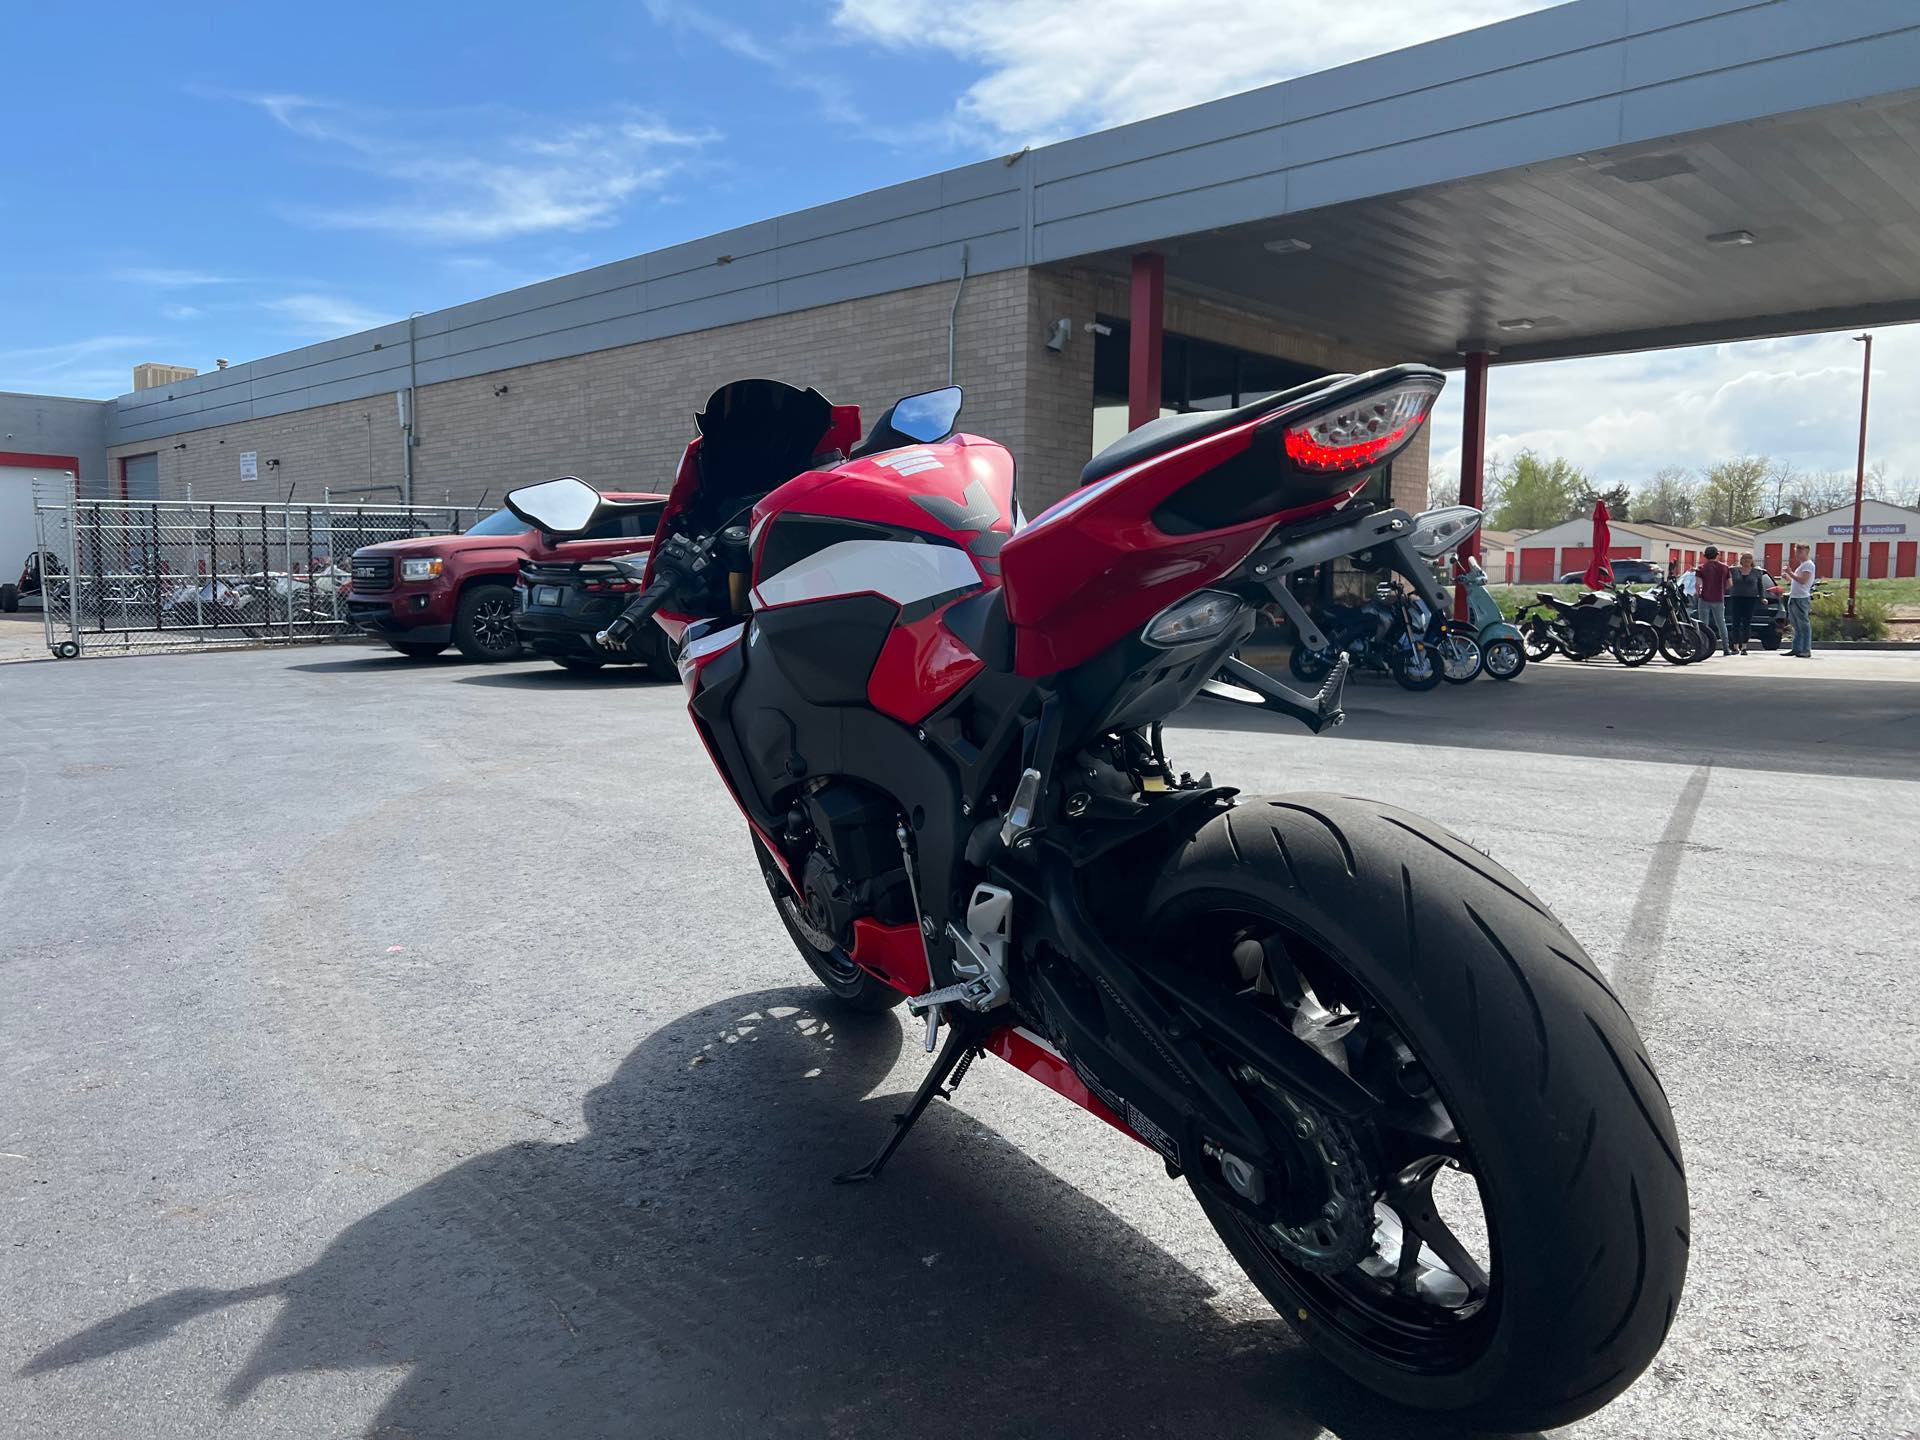 2021 Honda CBR1000RR ABS at Aces Motorcycles - Fort Collins